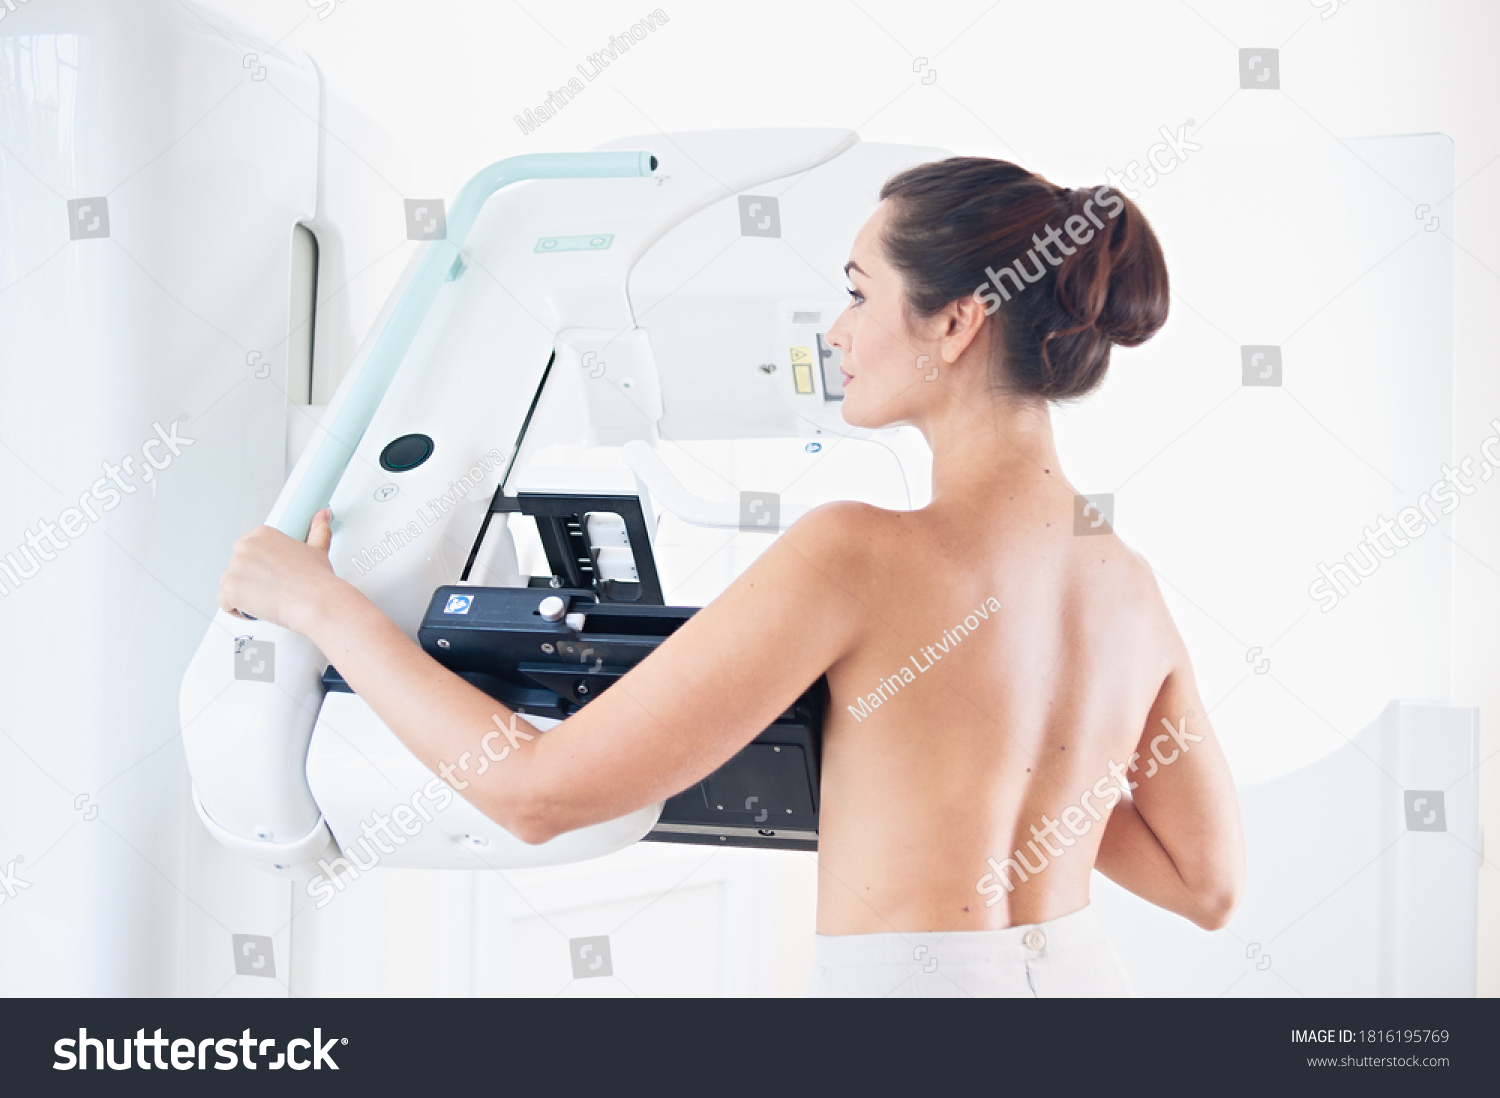 Young woman at breast cancer prevention screening at hospital. Hardware examination of the breast. Healthy young woman doing cancer prophylactic mammography scan. Modern hospital with hi-tech machine #1816195769